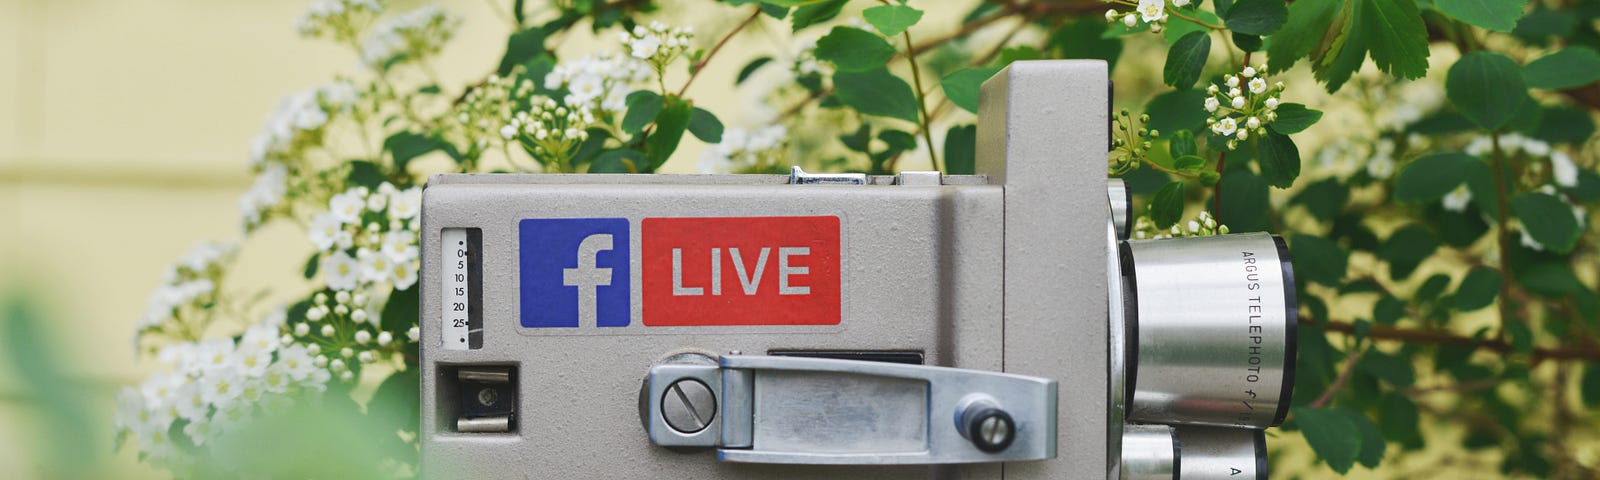 Using Facebook or Instagram Live should be a part of your social media strategy — no matter what industry you are in.